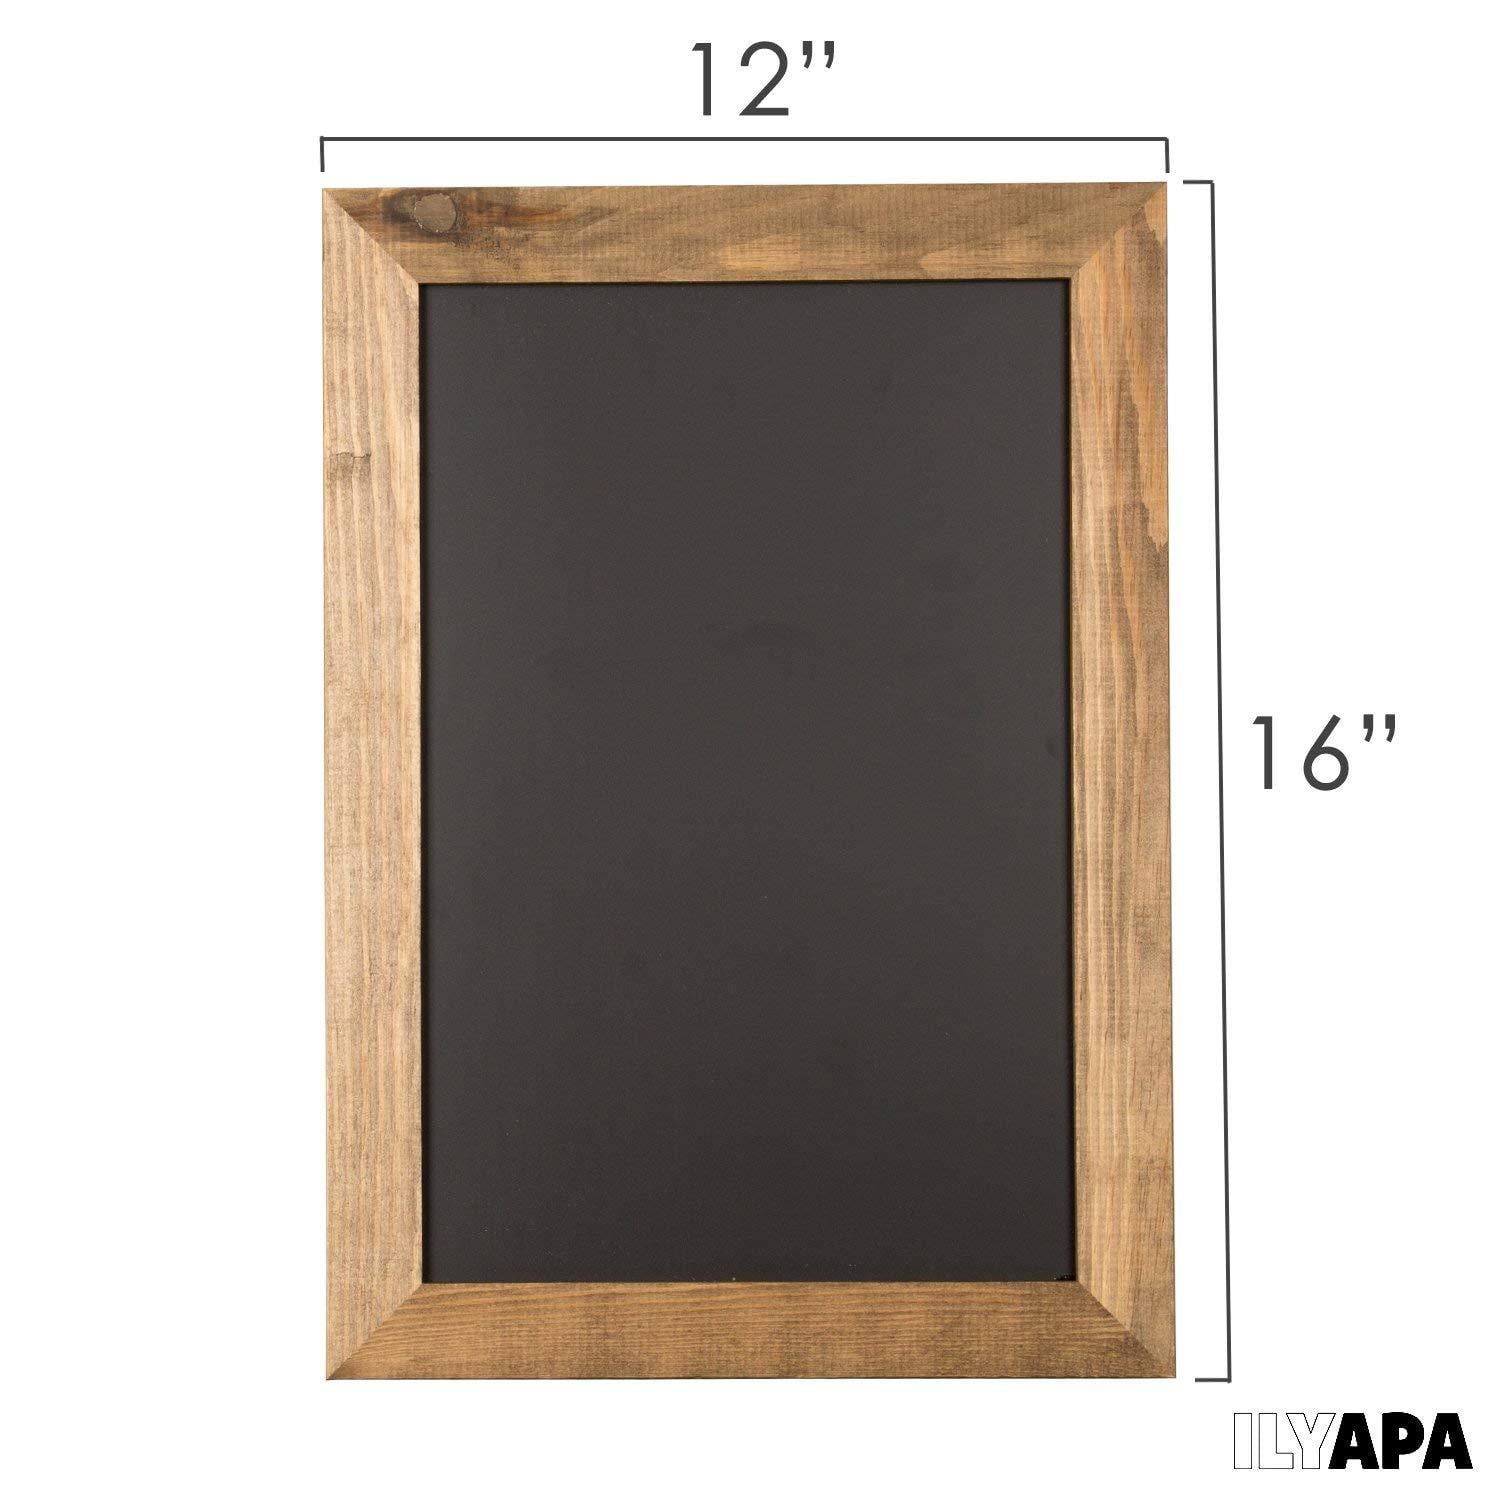 Wall Mounted Entryway Cabinet Brown Wooden Rustic Magnetic Chalkboard 